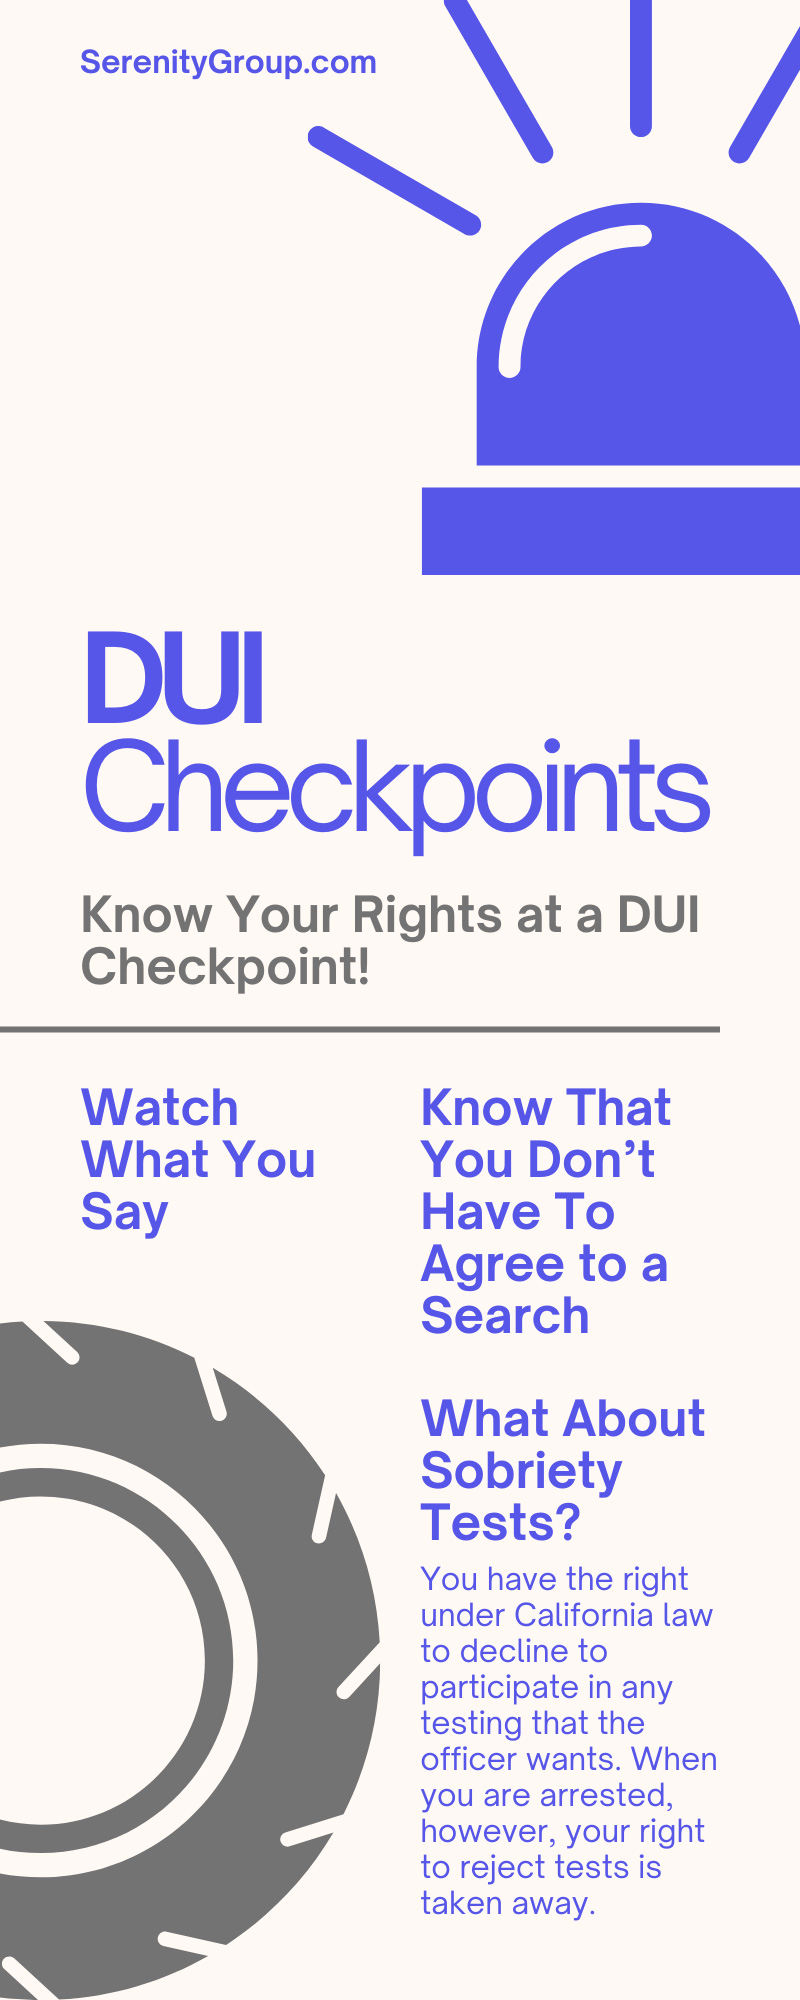 All There Is To Know About DUI Checkpoints In California